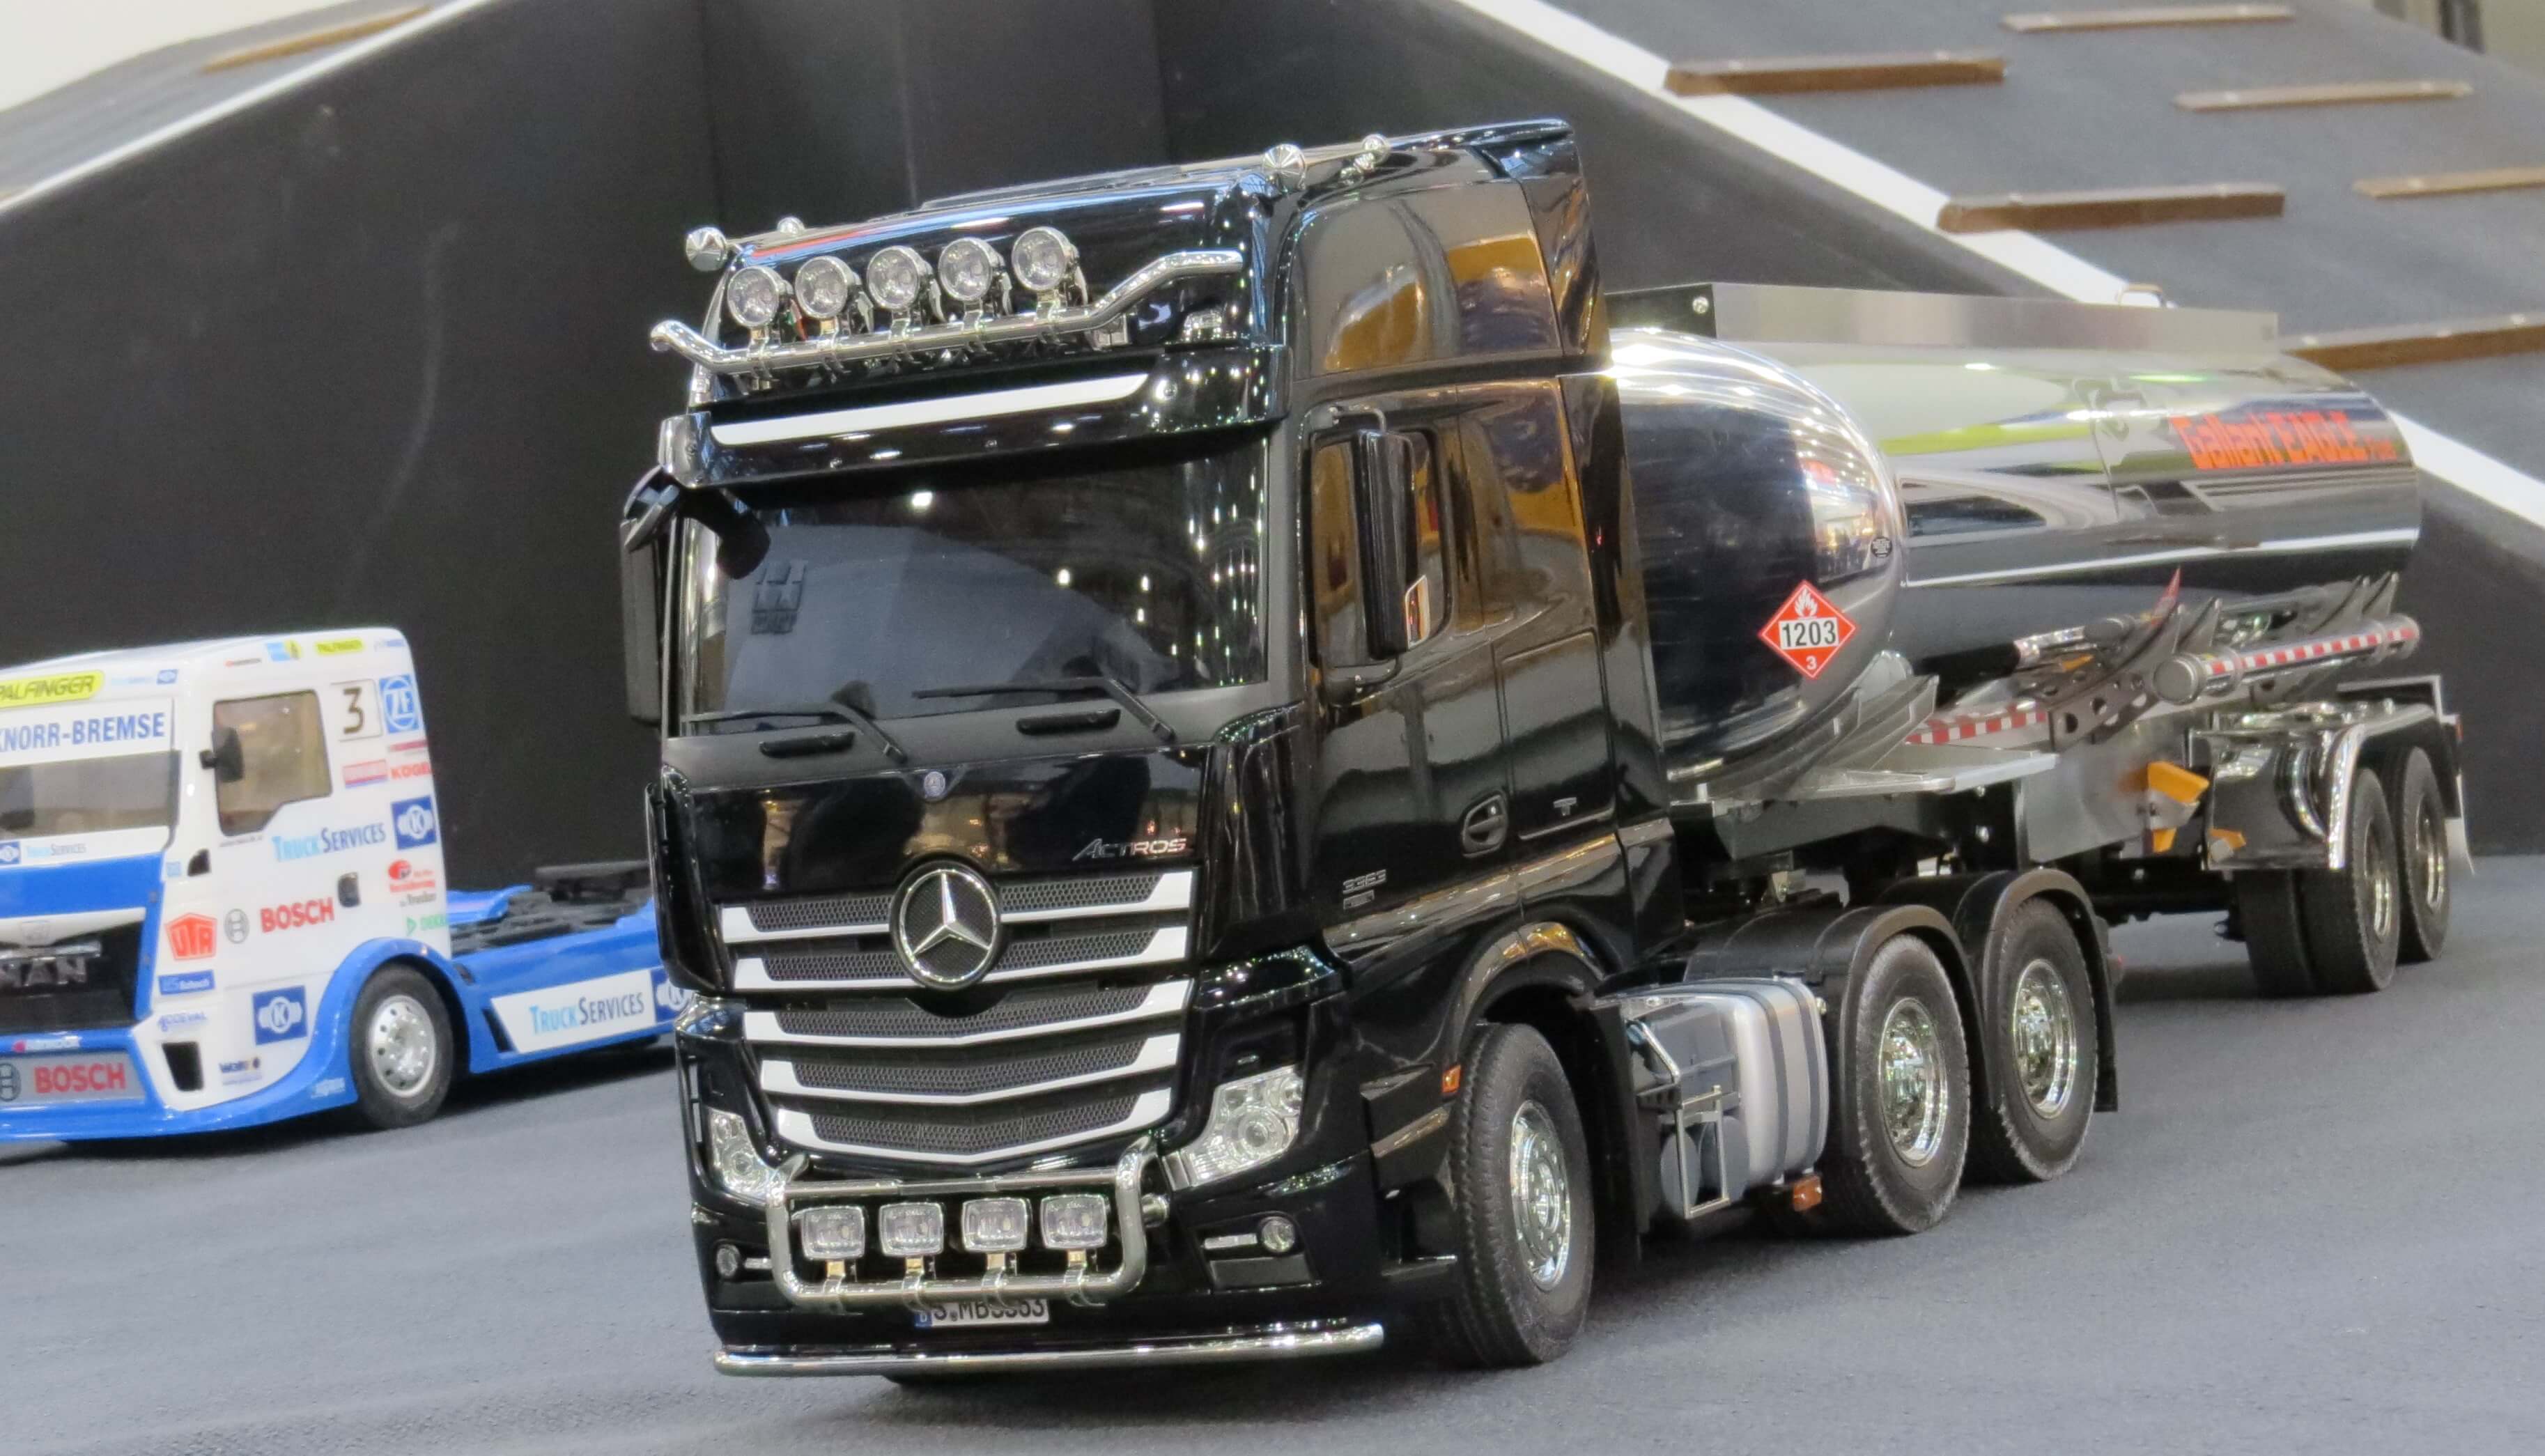 Camion rc Tamiya rc Mercedes Actros 3363 6x4 Gigaspace